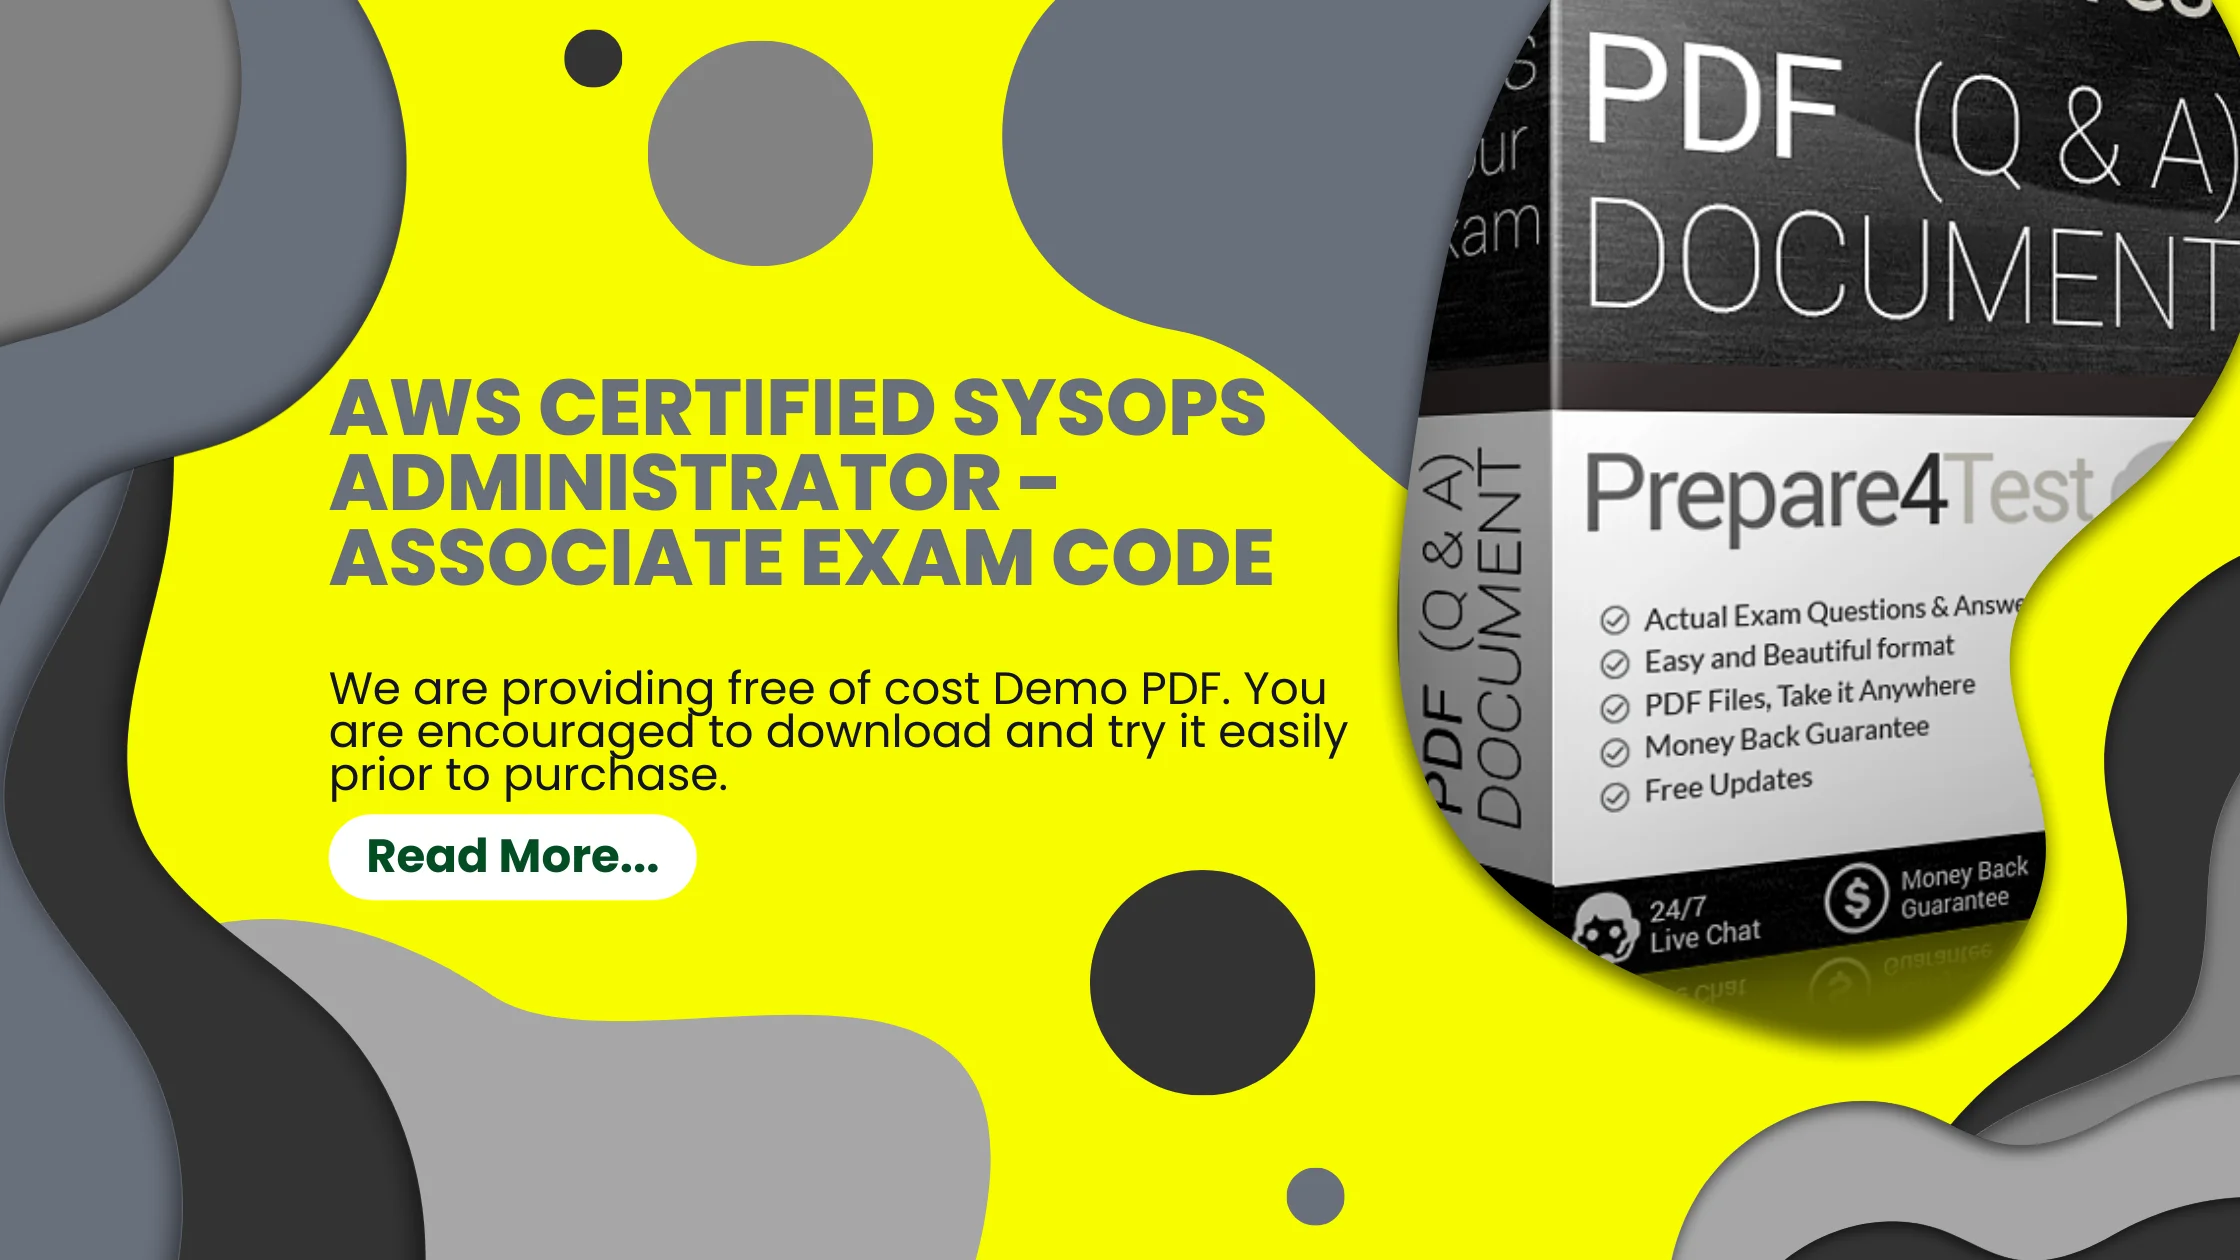 AWS Certified SysOps Administrator - Associate Exam Code promotion